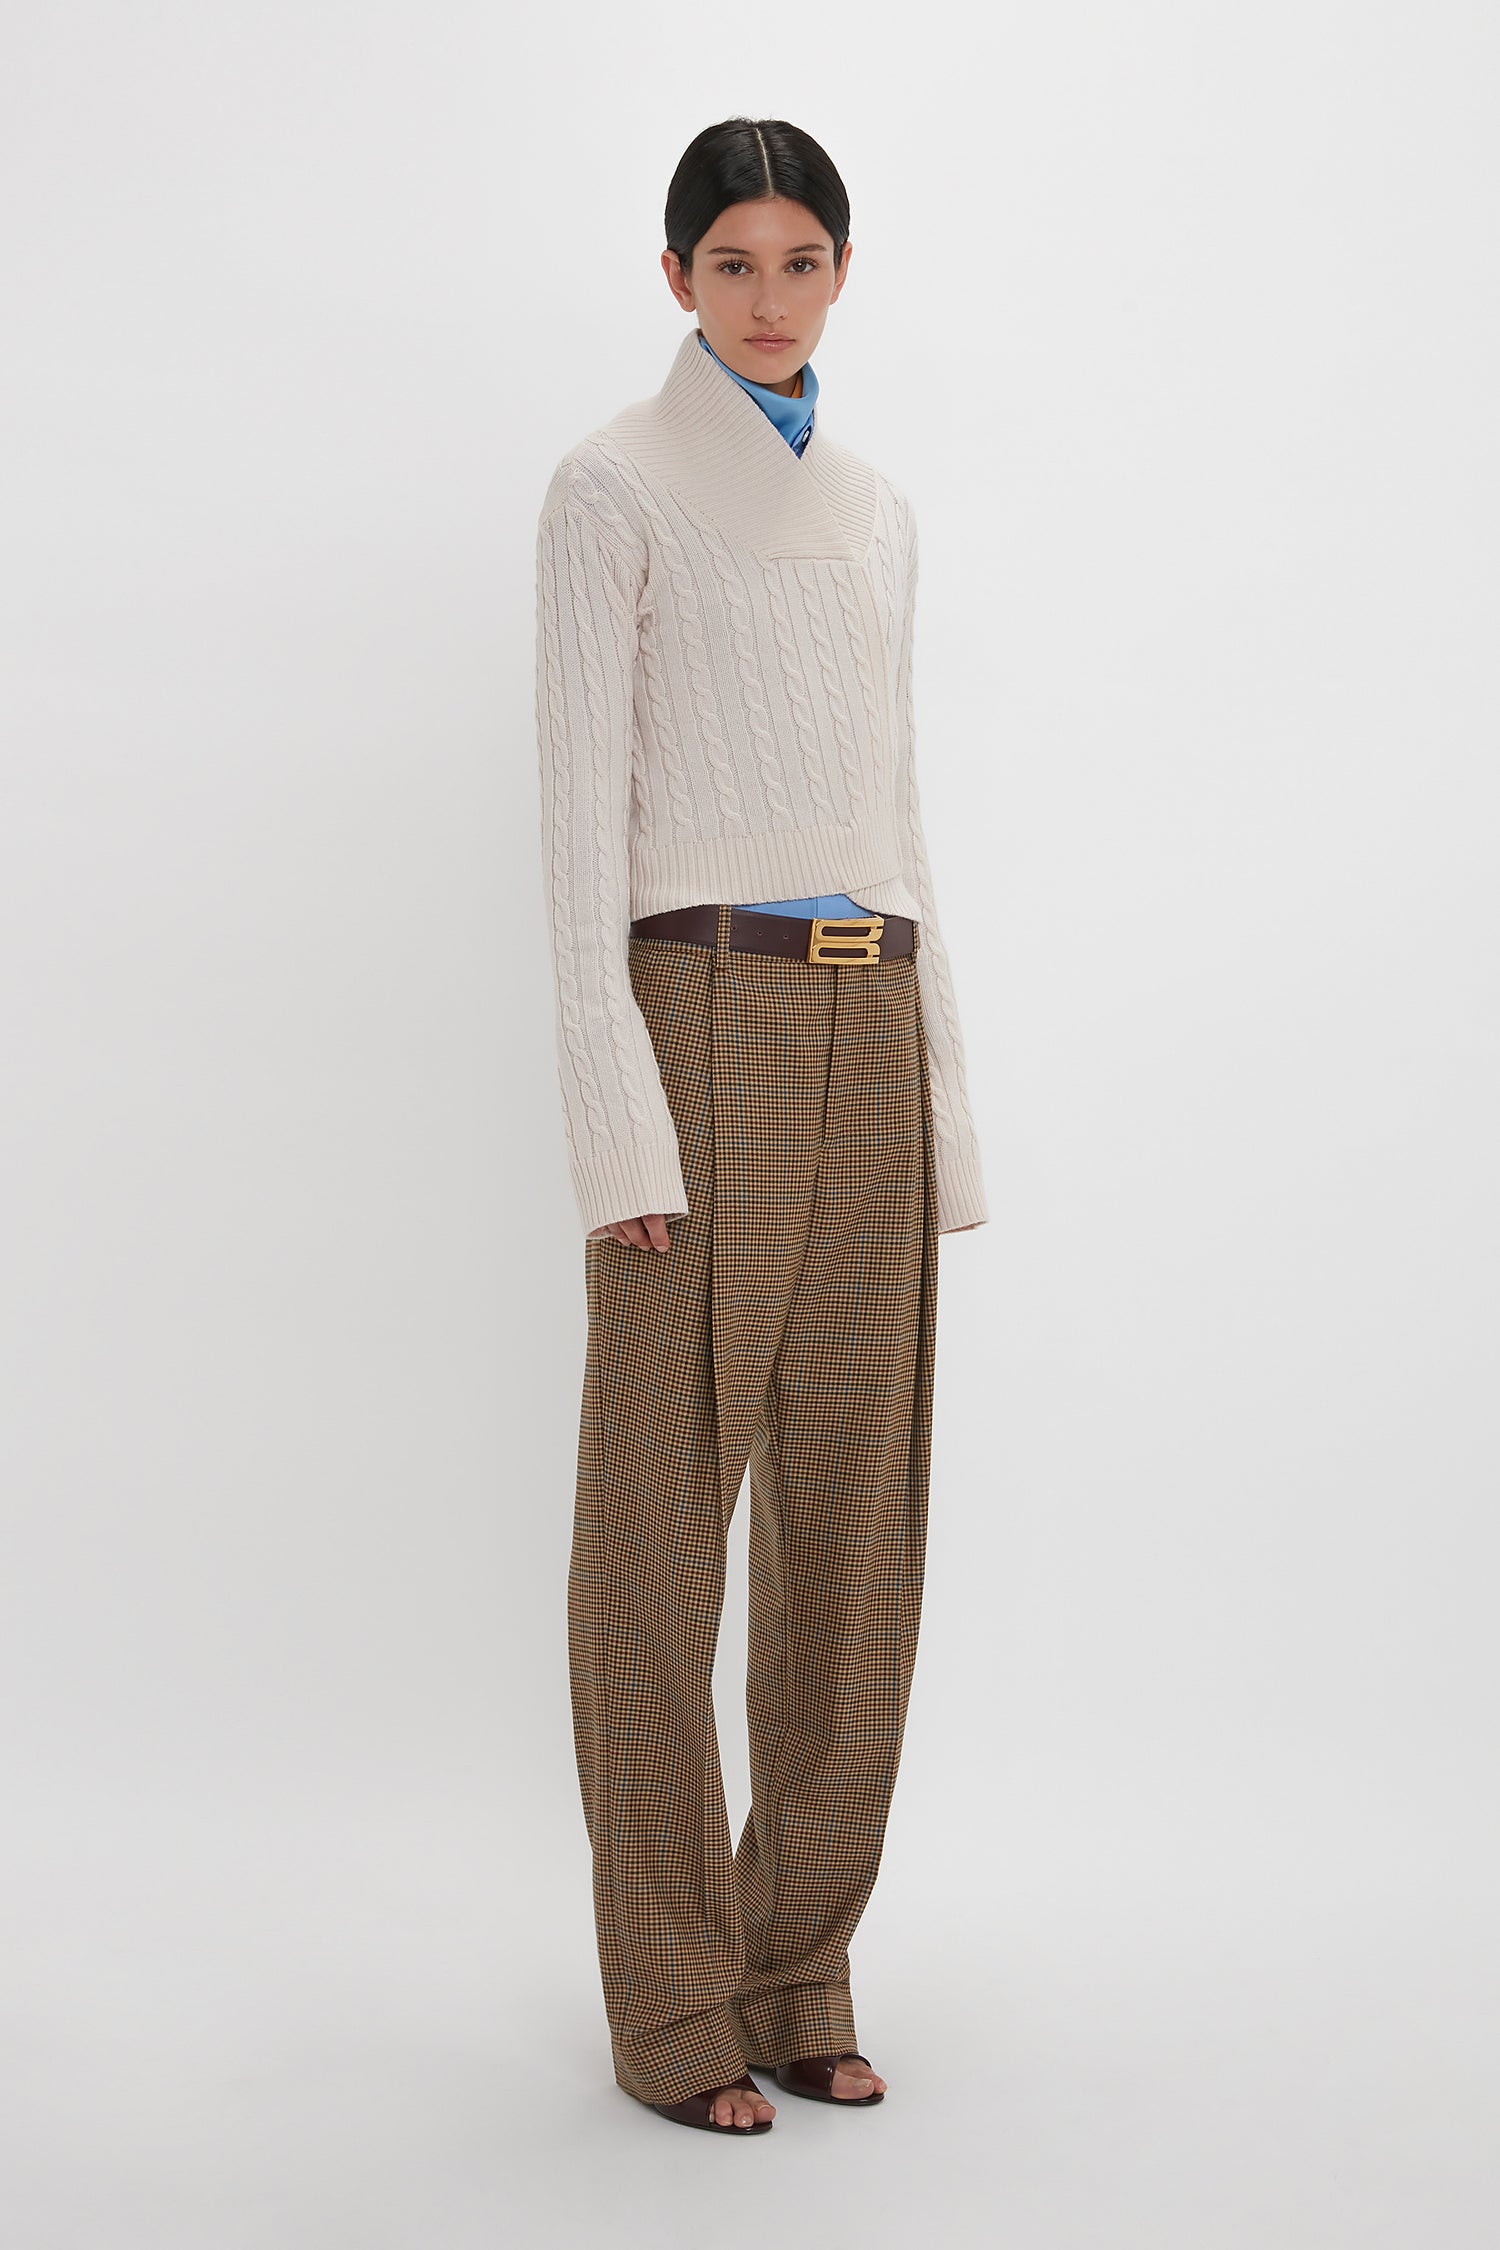 A person stands against a plain background, showcasing a fitted wrap-style silhouette in the *Wrap Detail Jumper In Bone* by *Victoria Beckham*. They pair it with brown checkered trousers, a blue collared shirt, and a brown belt.